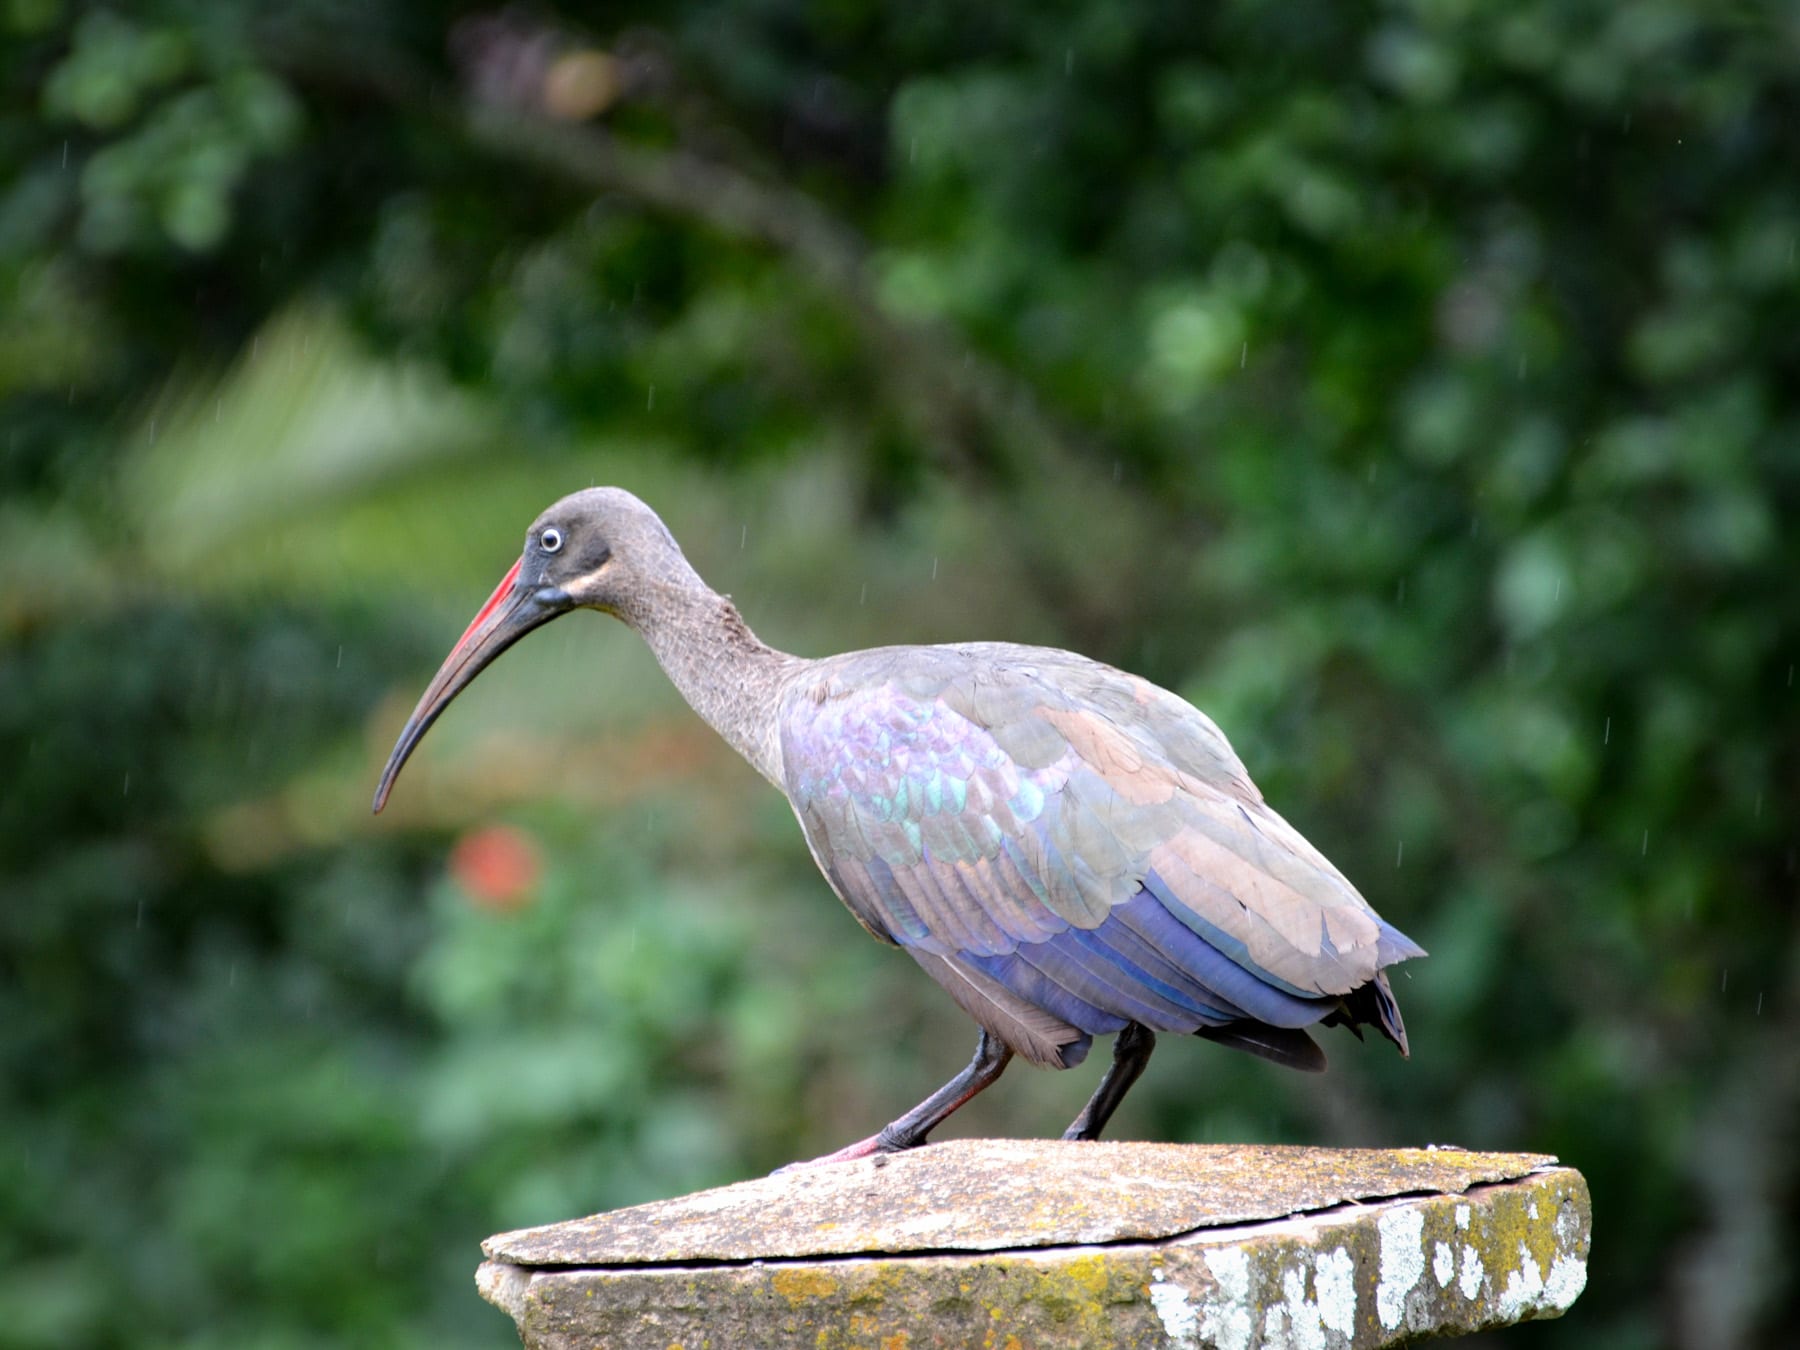 Kenya is home to more than 1,000+ species of birds.